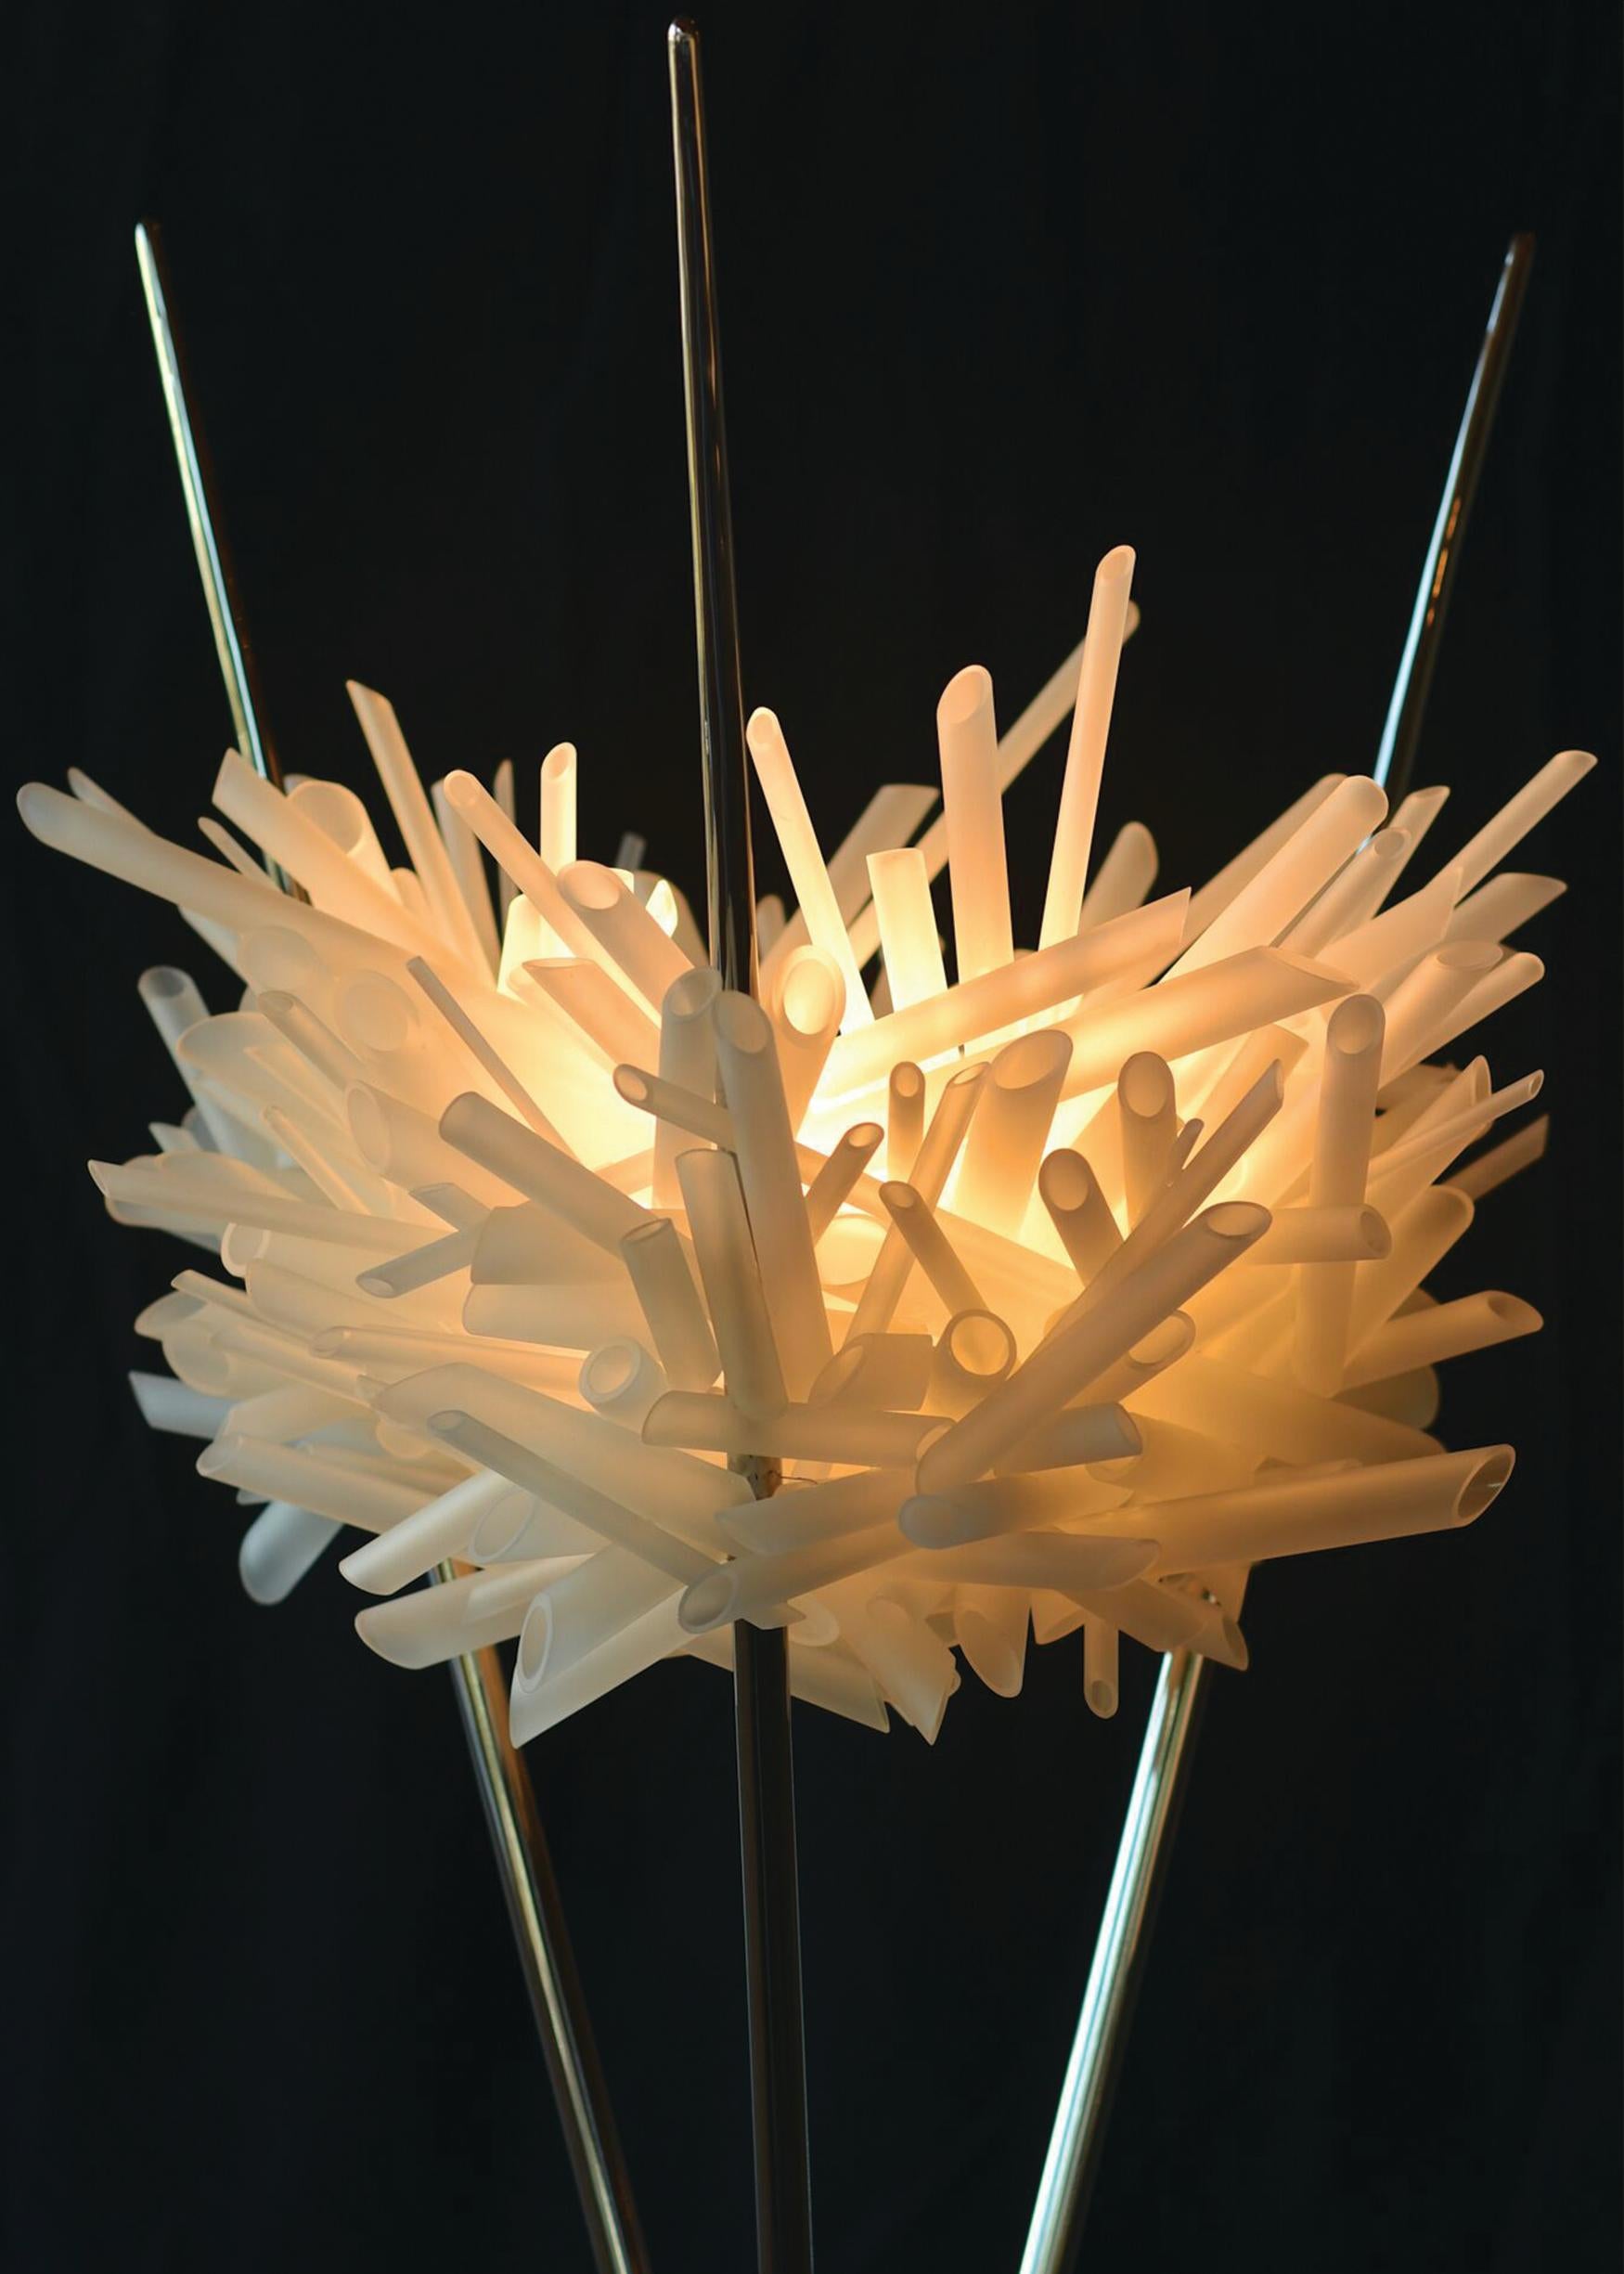 Dynamic, exuberant, and playful from every angle and perspective, The Boro Boro Floor Light functions as a sculptural, efficient light source with an inviting and energetic presence. 
Materials: Borosilicate glass tubes and rods, stainless steel